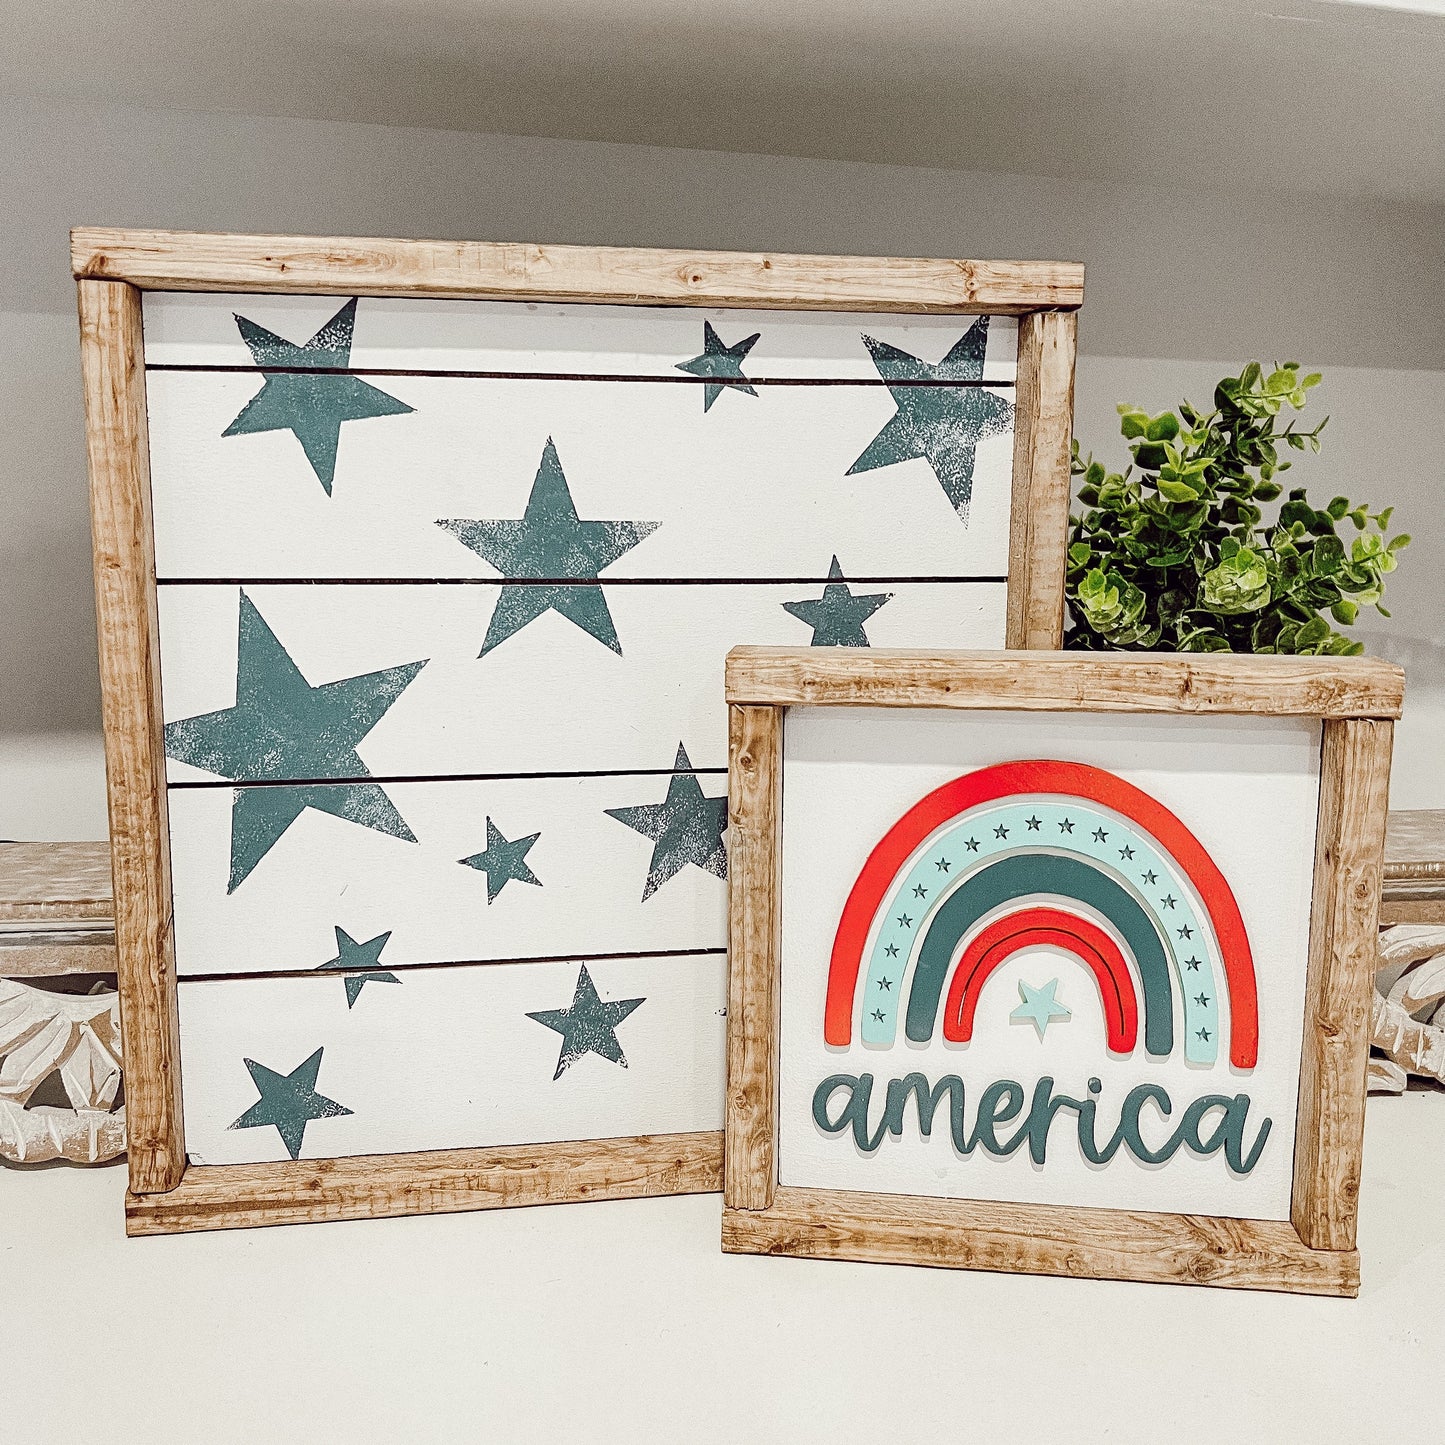 America Bundle! Shiplap star background with red, white and blue rainbow sign [FREE SHIPPING]